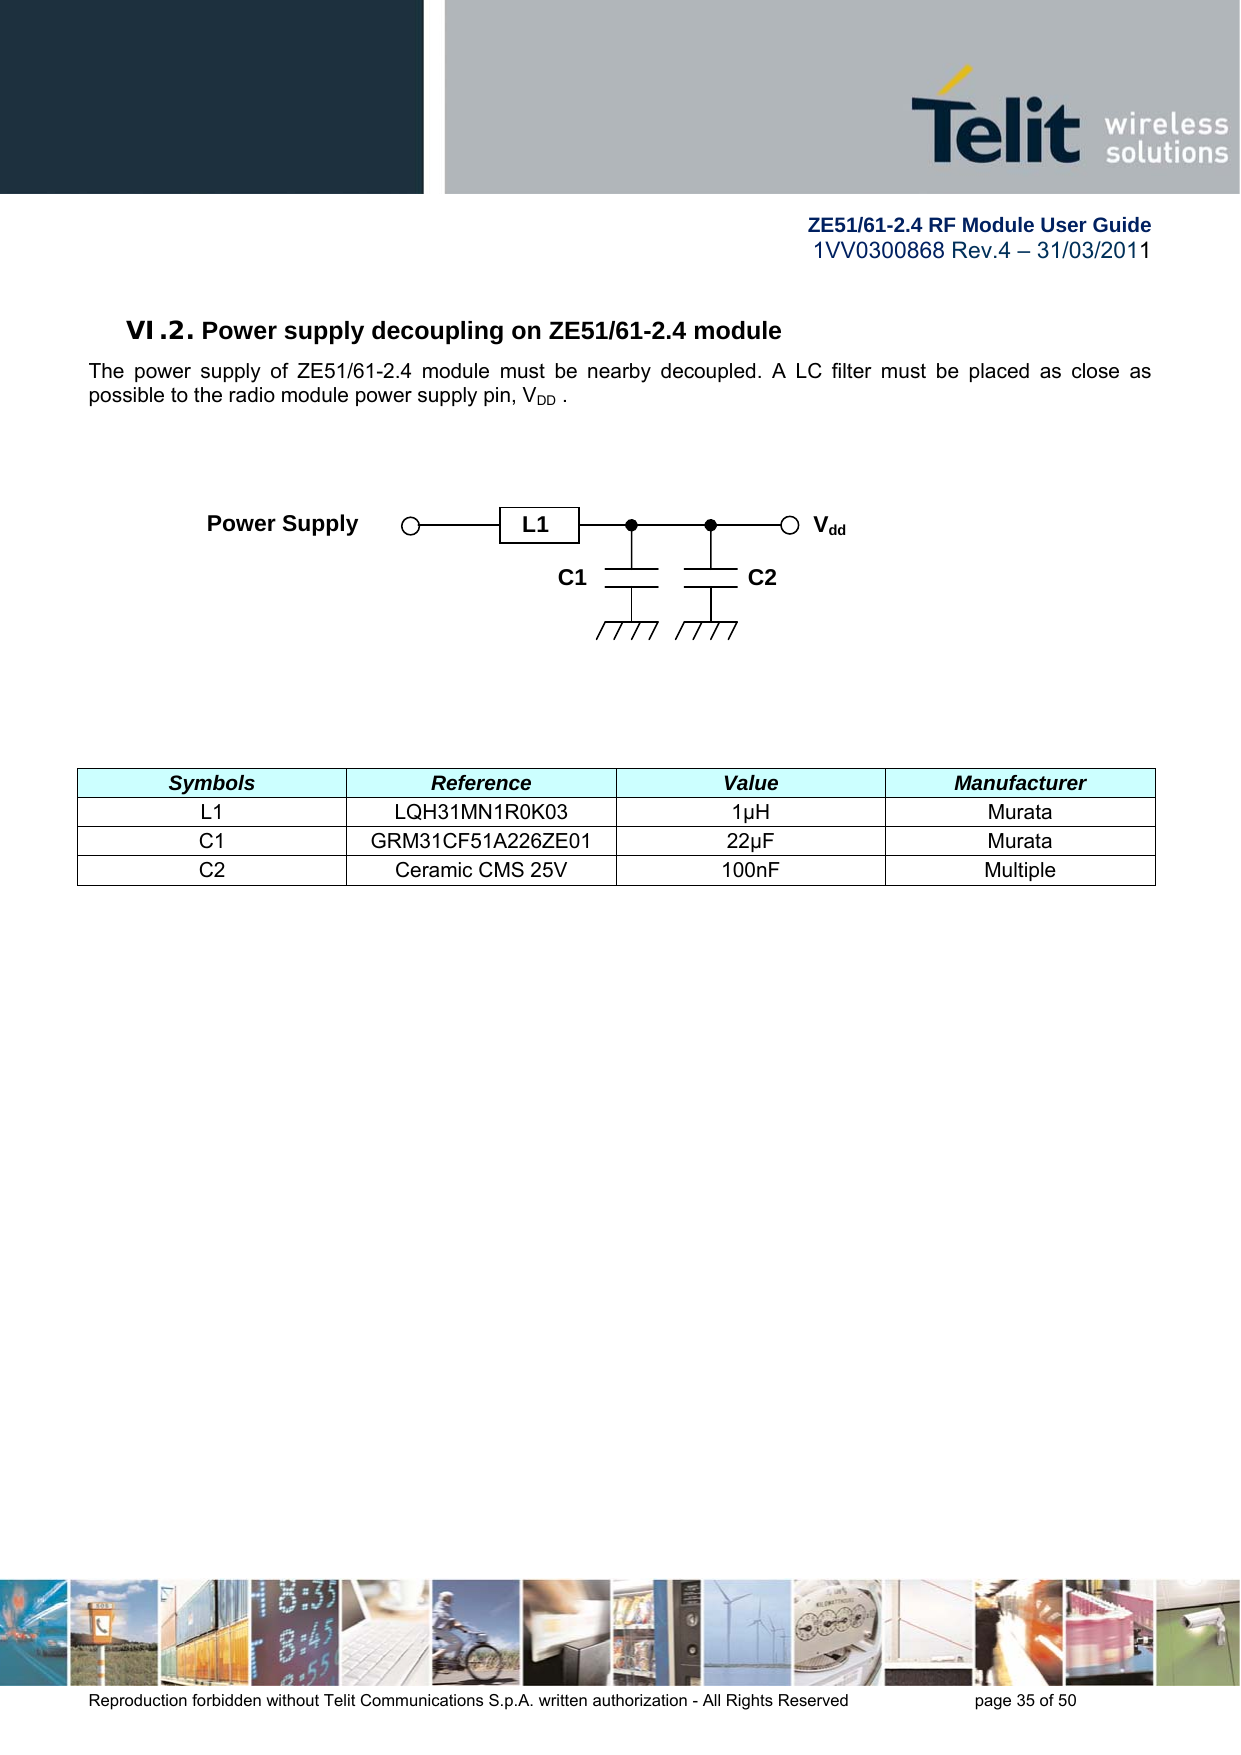        ZE51/61-2.4 RF Module User Guide 1VV0300868 Rev.4 – 31/03/2011 Reproduction forbidden without Telit Communications S.p.A. written authorization - All Rights Reserved    page 35 of 50  VI.2. Power supply decoupling on ZE51/61-2.4 module The power supply of ZE51/61-2.4 module must be nearby decoupled. A LC filter must be placed as close as possible to the radio module power supply pin, VDD .               Symbols  Reference  Value  Manufacturer L1 LQH31MN1R0K03 1µH  Murata C1 GRM31CF51A226ZE01 22µF  Murata C2  Ceramic CMS 25V  100nF  Multiple  Vdd C1 C2 Power Supply  L1 